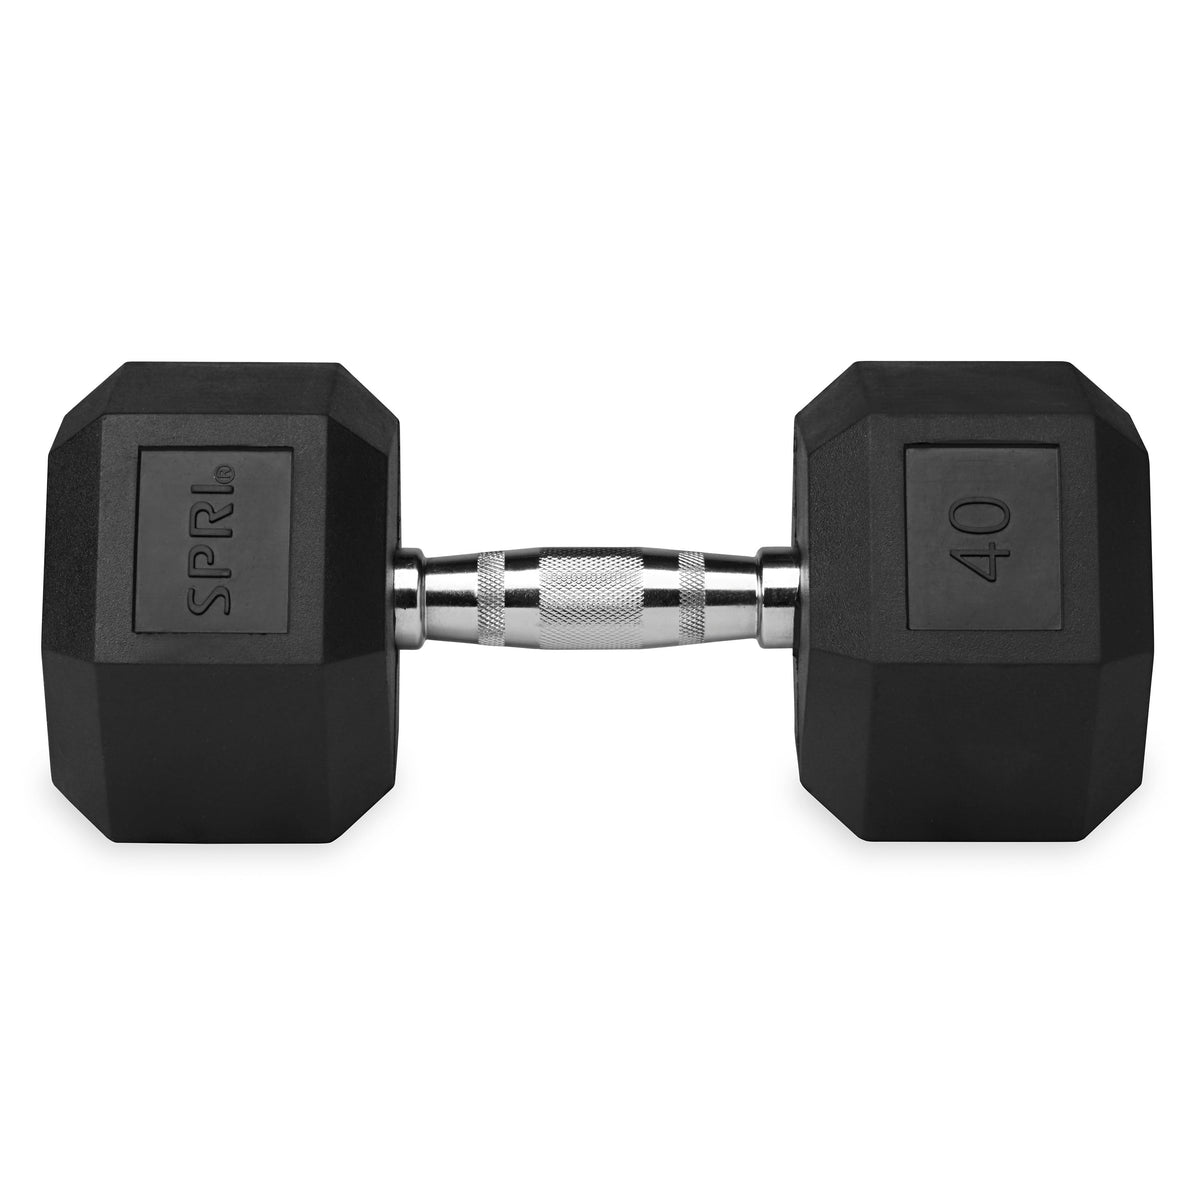 40lb six-sided single dumbbell side view